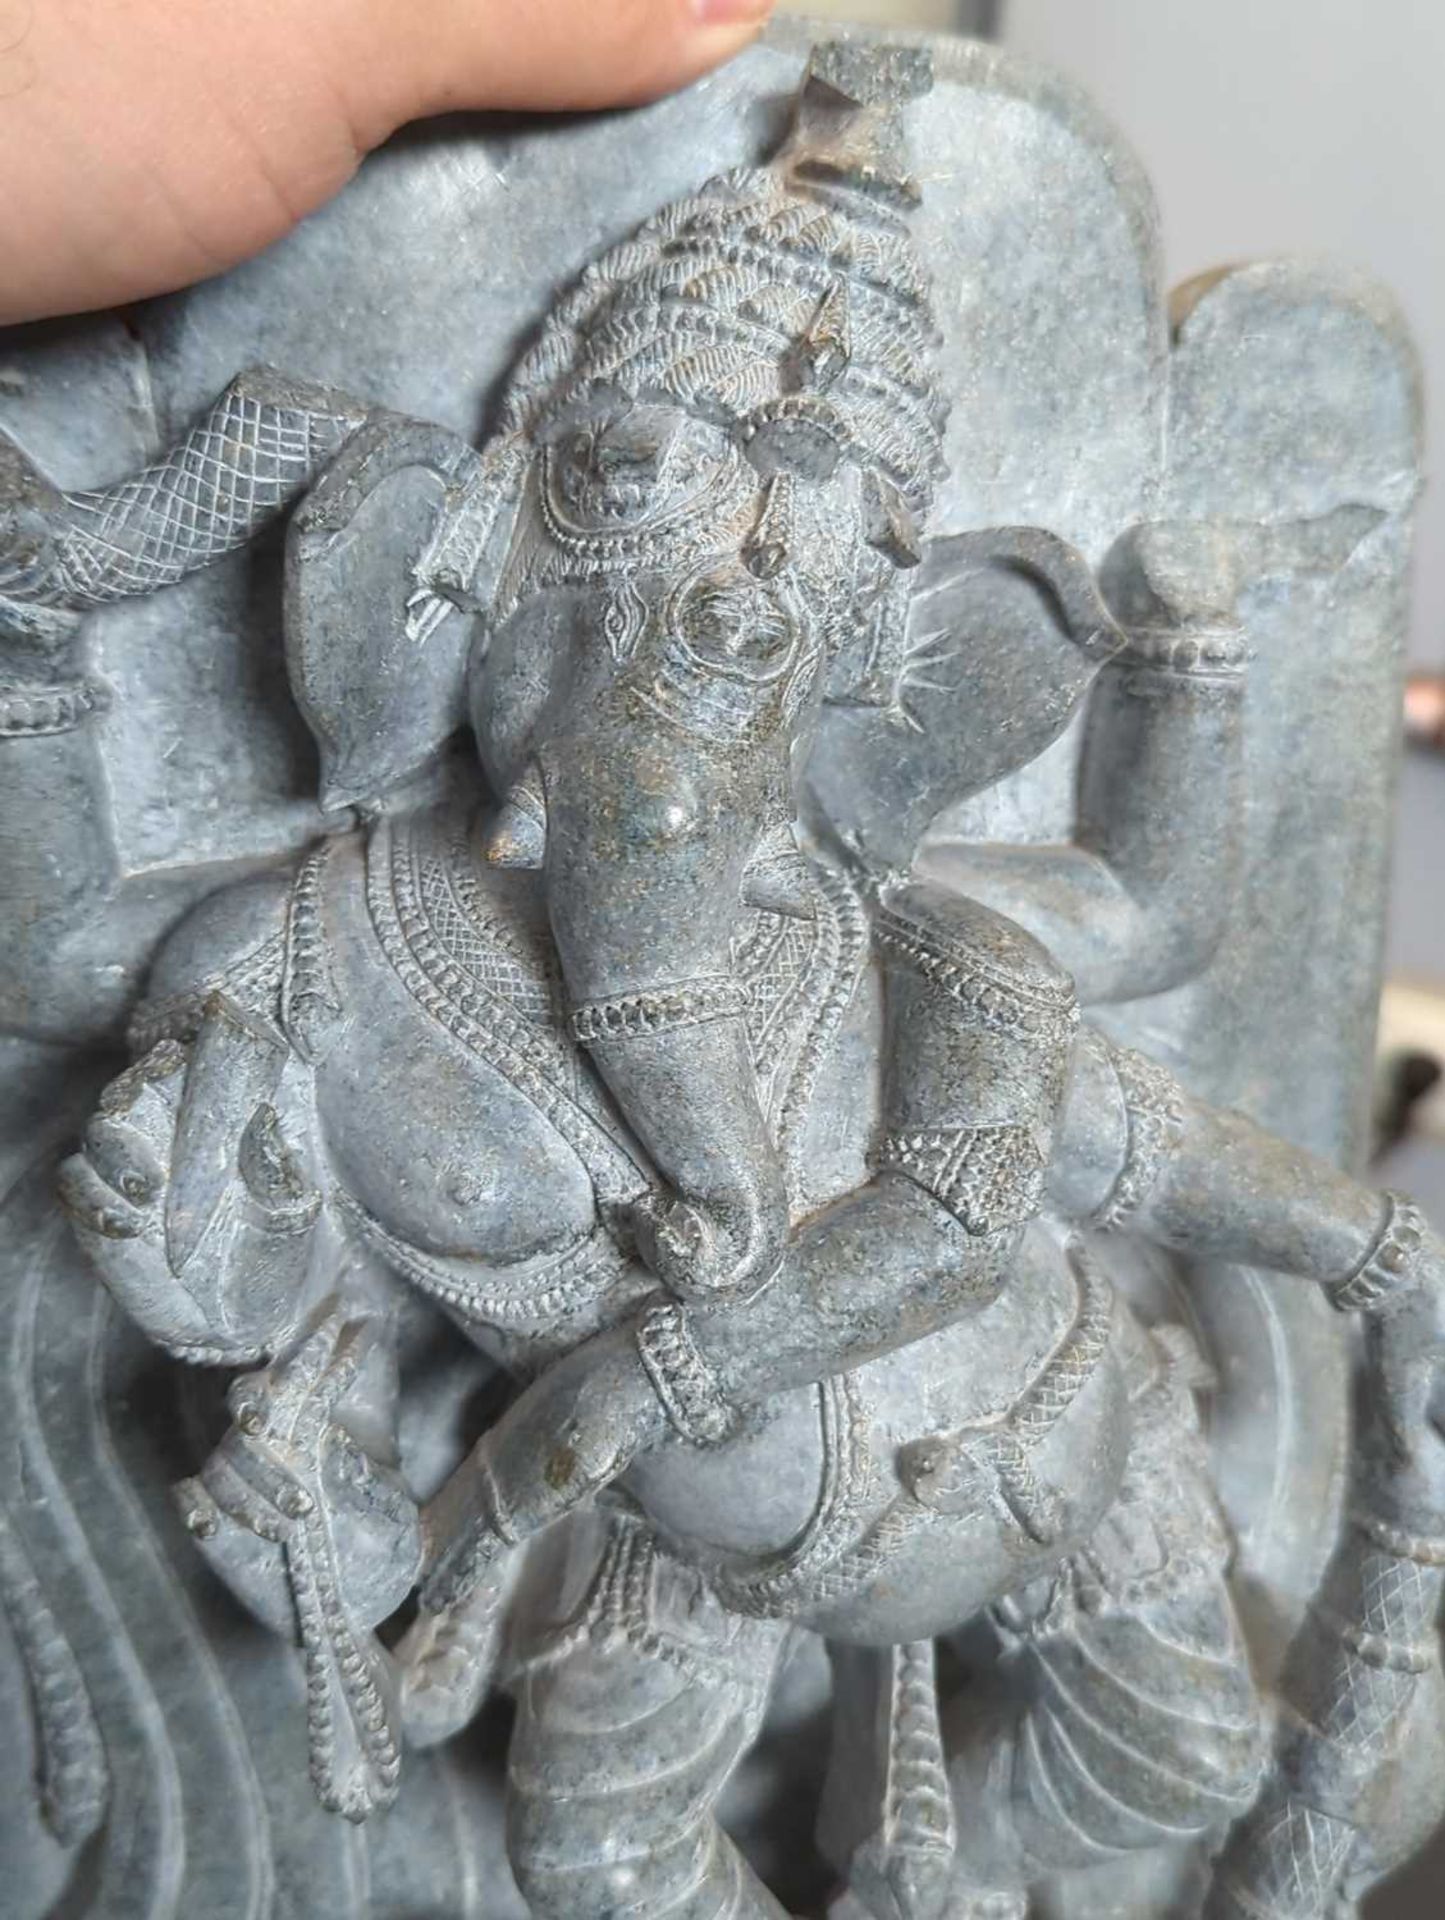 DANCING GANESHA LORD OF OBSTACLES - Bild 7 aus 12